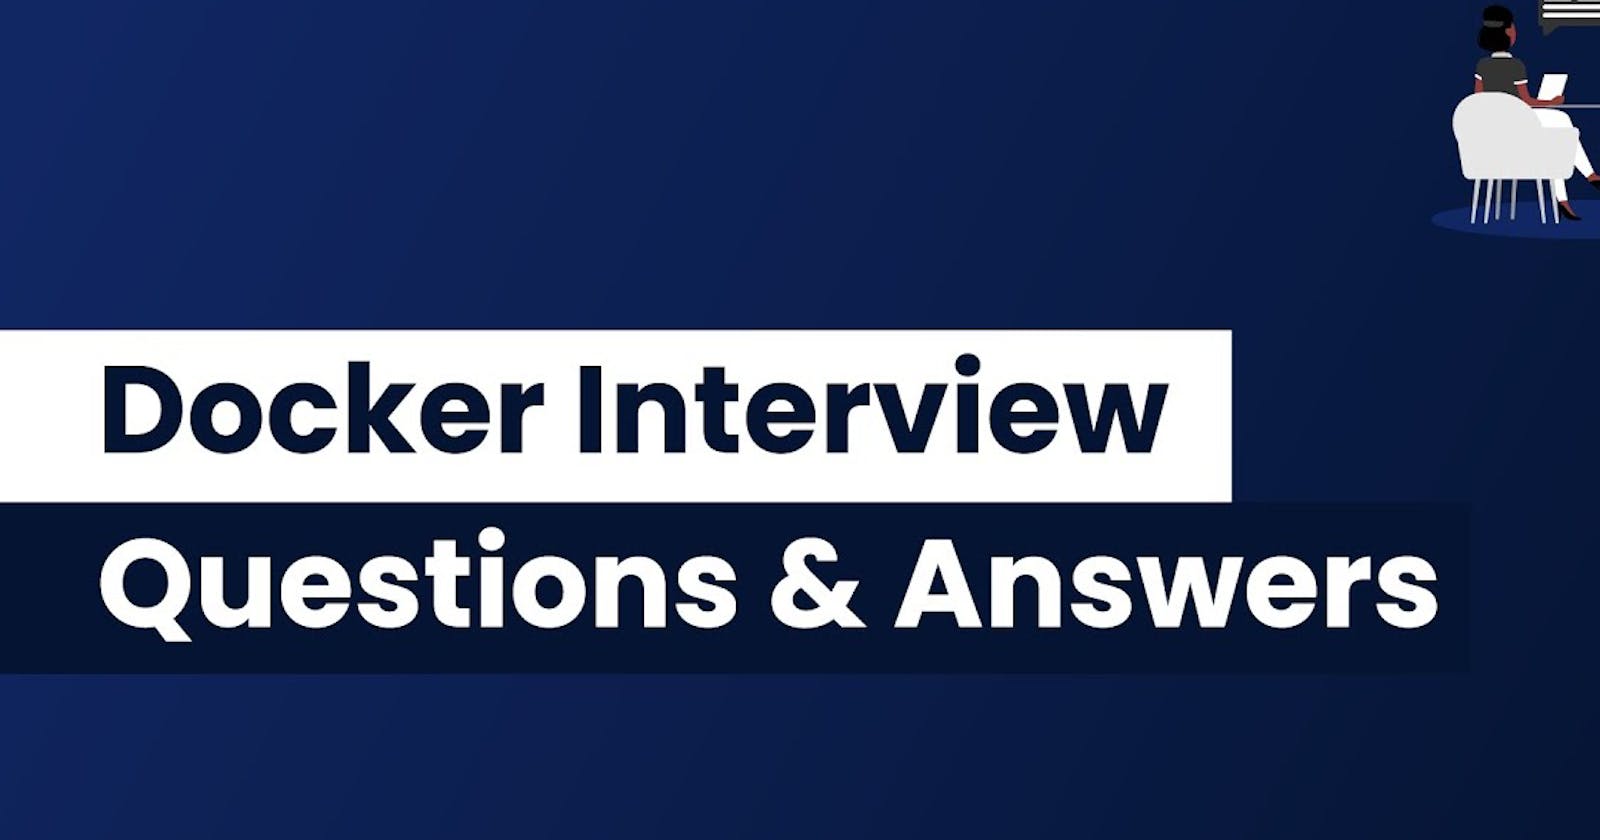 Day 21 - Docker Interview Questions and Answers